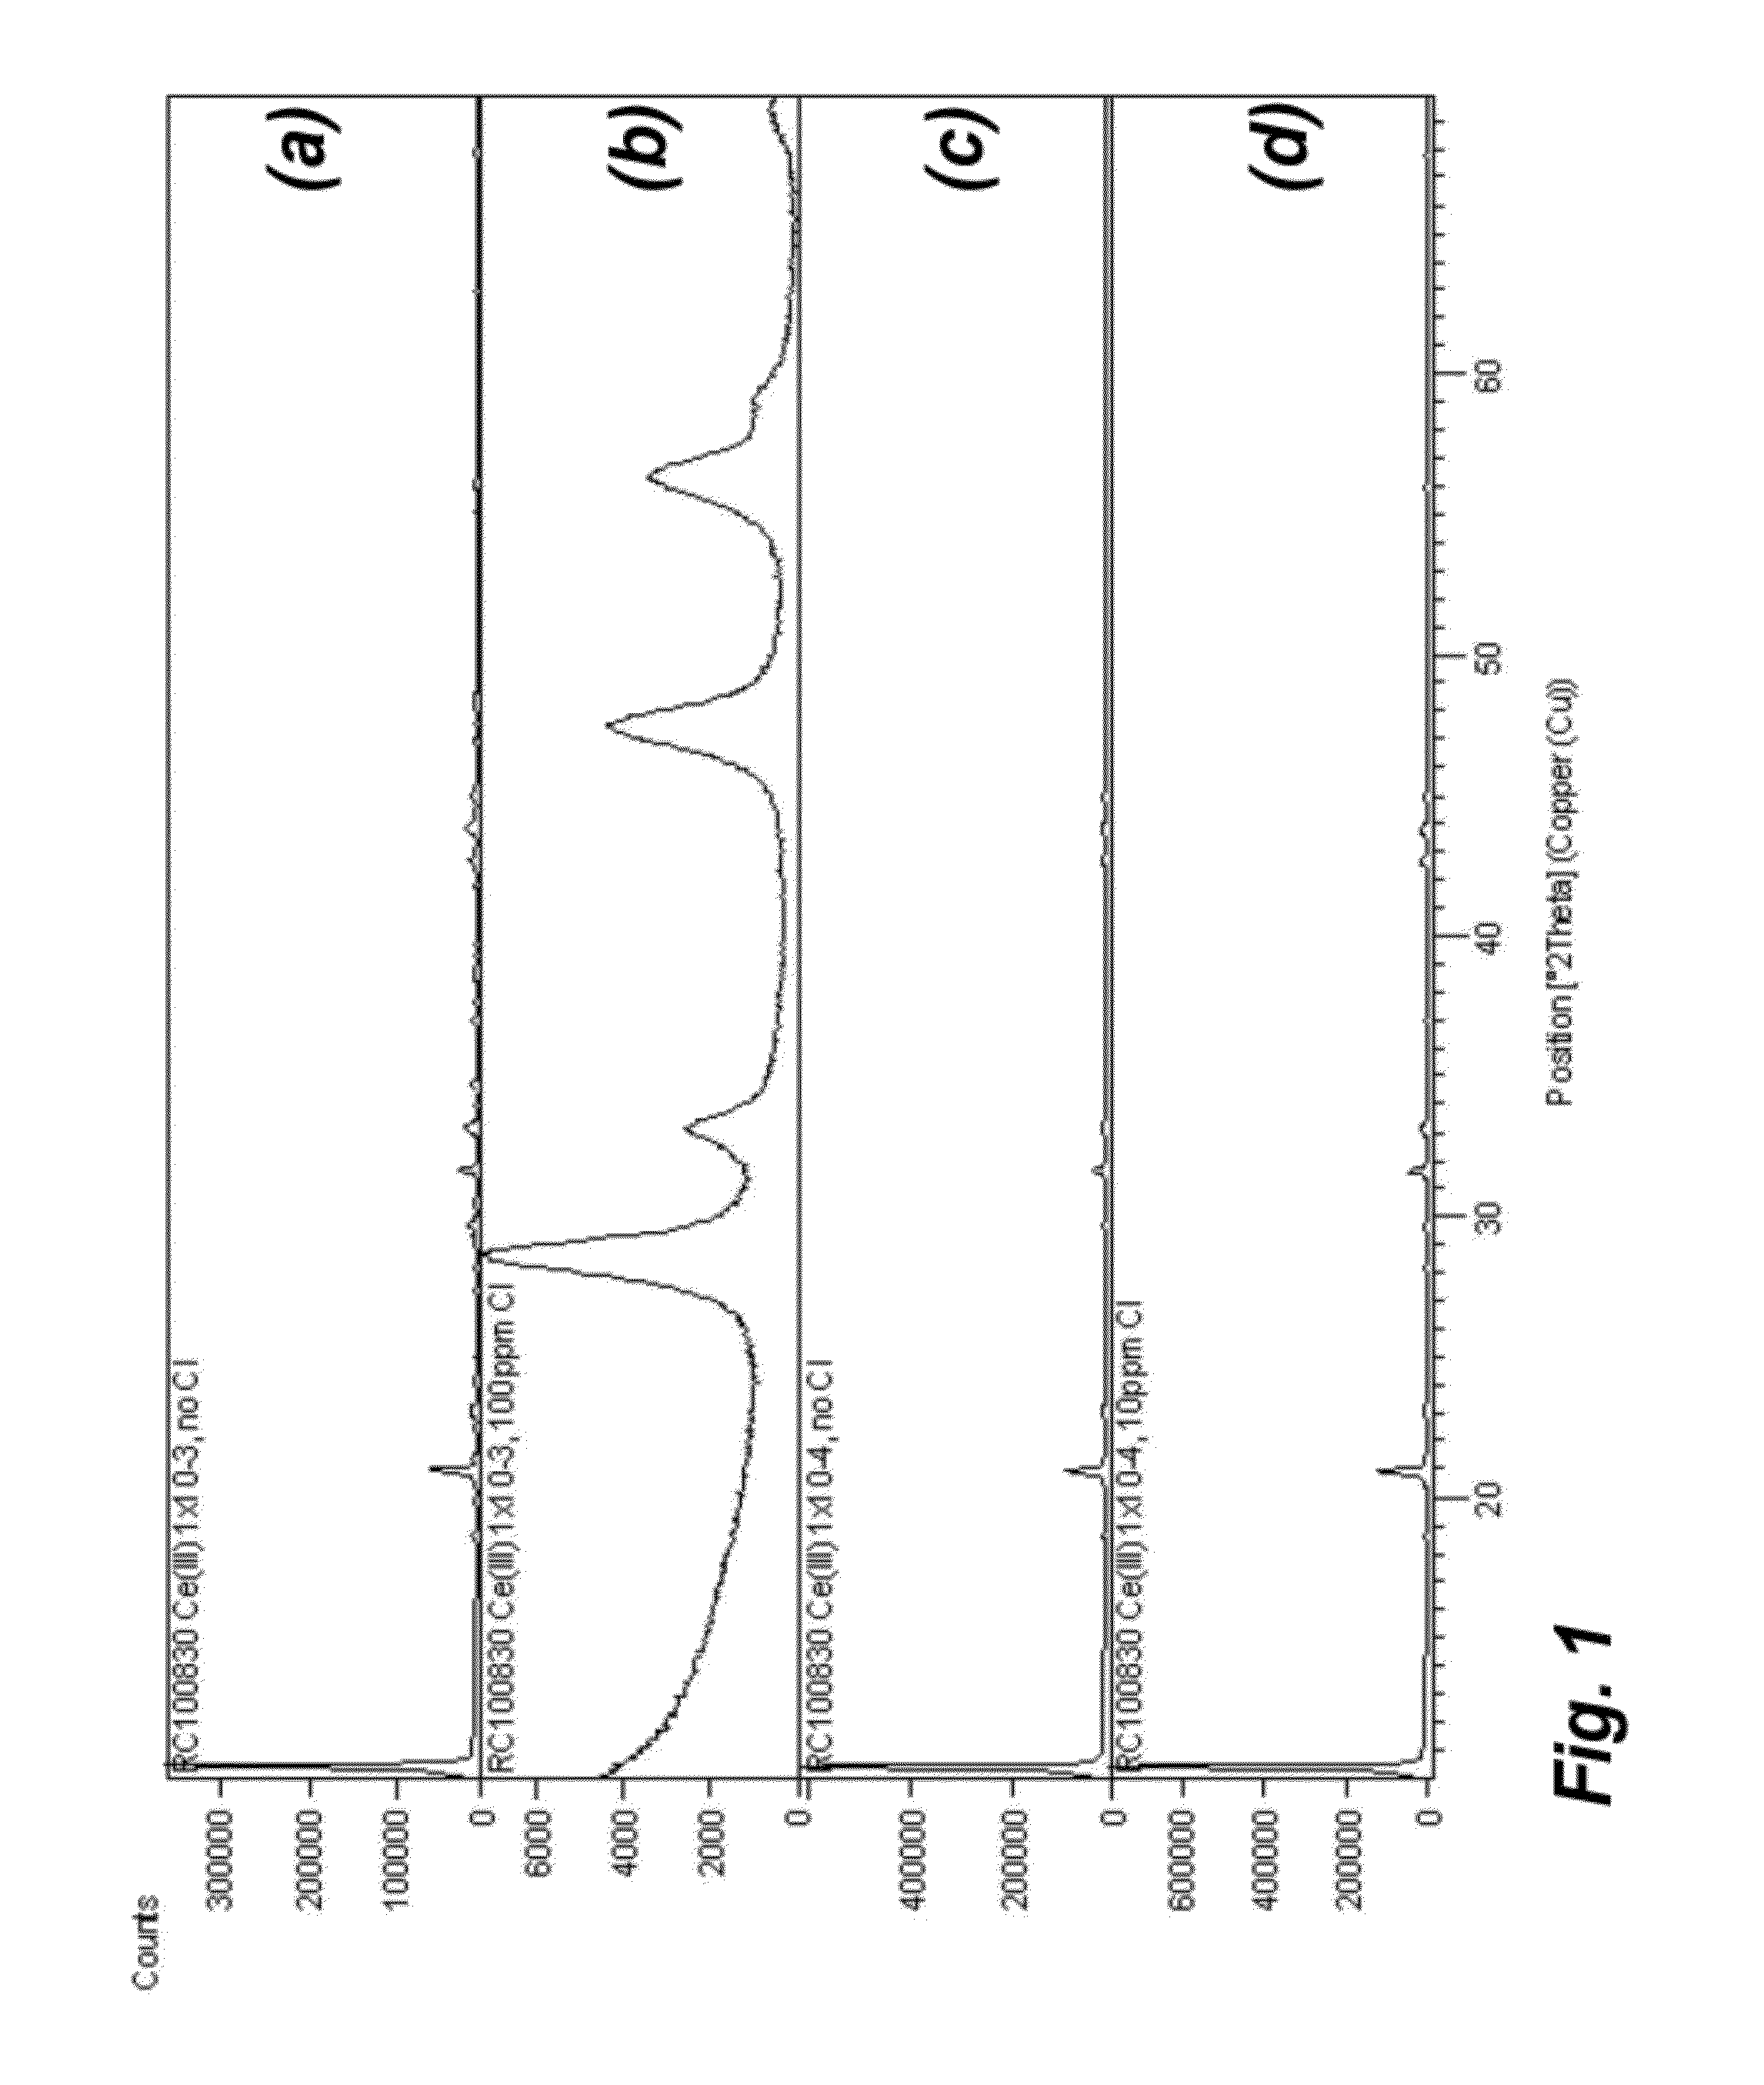 Particulate cerium dioxide and an in situ method for making and using the same